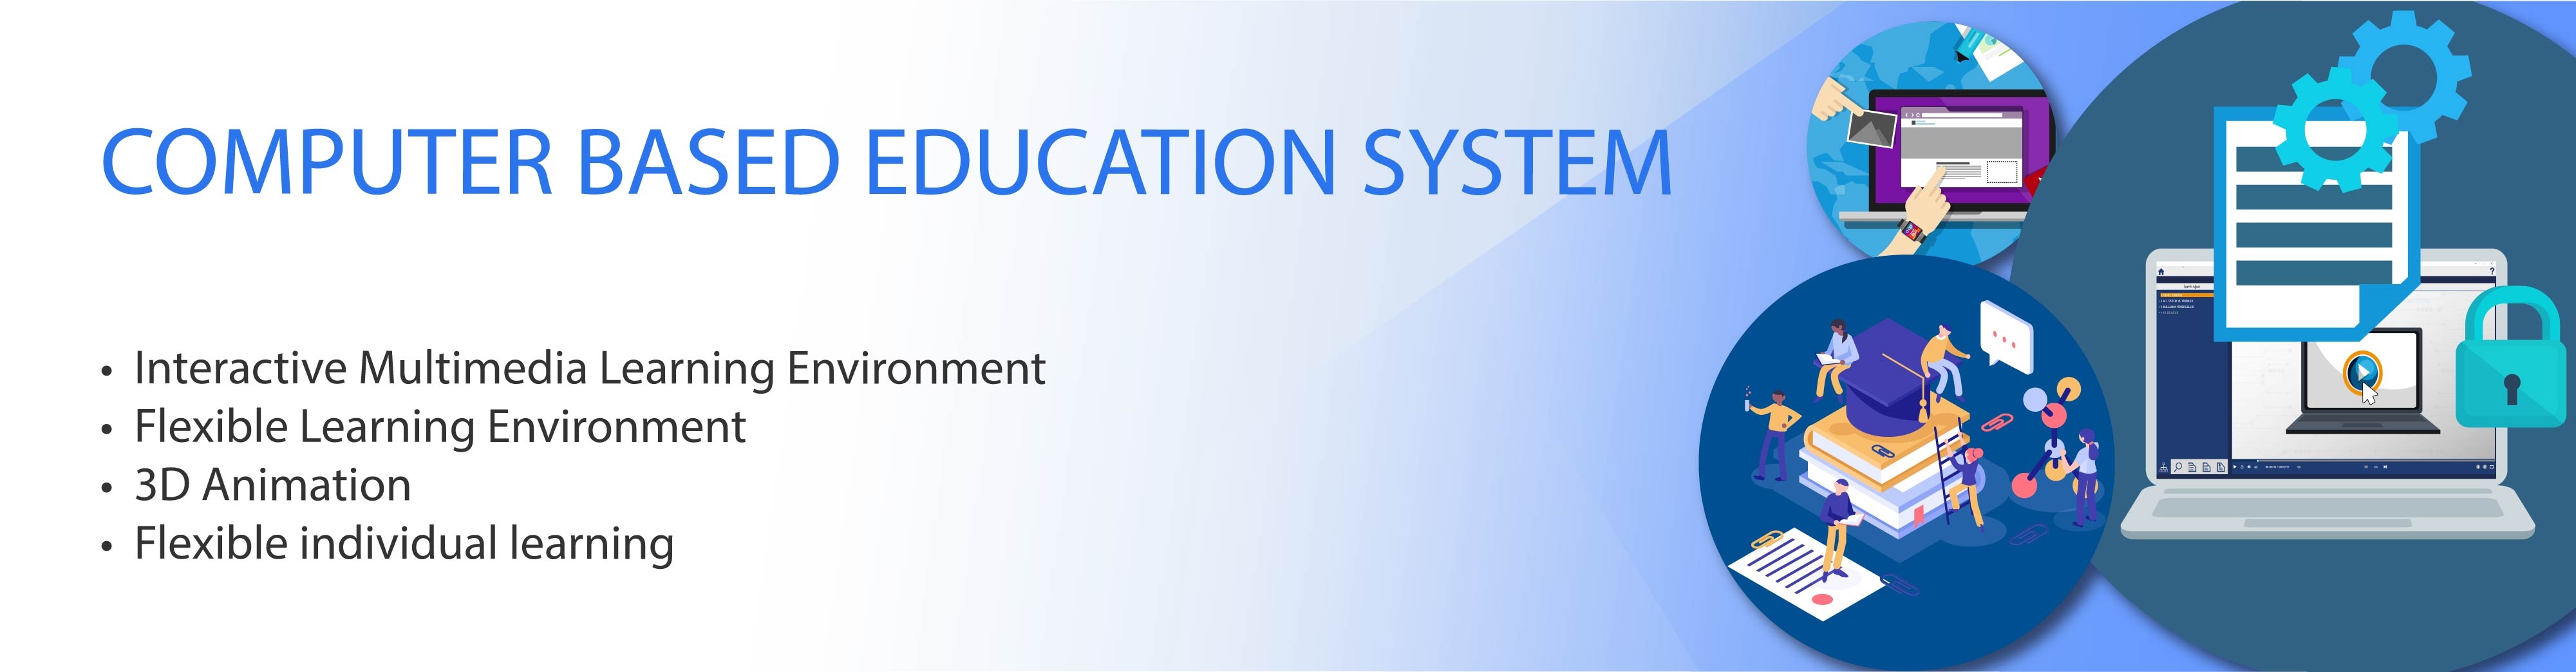 Computer Based Education System